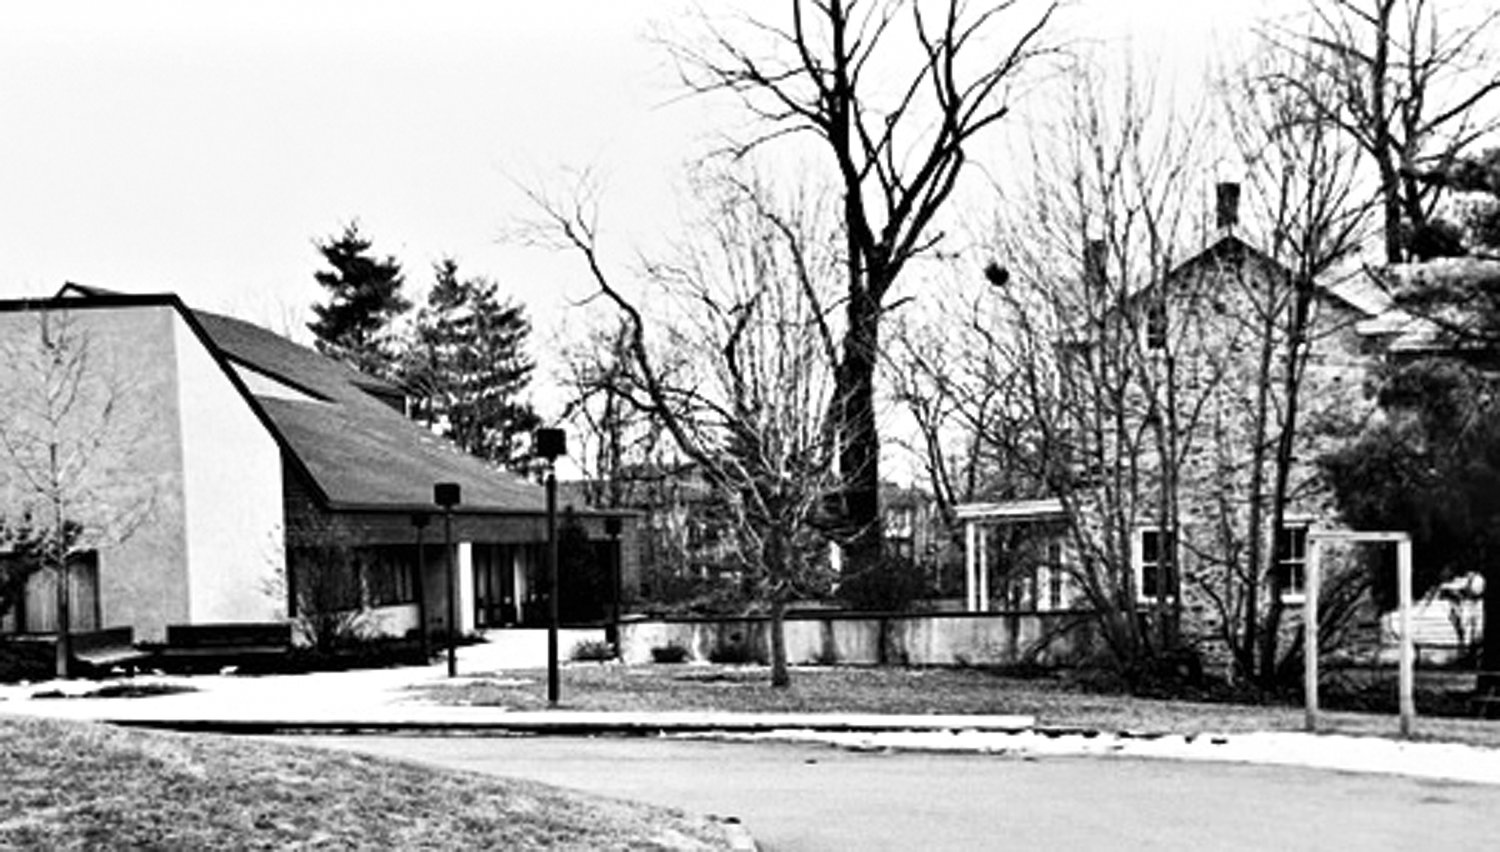 In 1979, the YMCA opened a $1.6 million structure, designed by local architect Lynn Taylor, at 2500 Lower State Road next to the old Nathan James farmhouse, which served as its administrative offices.